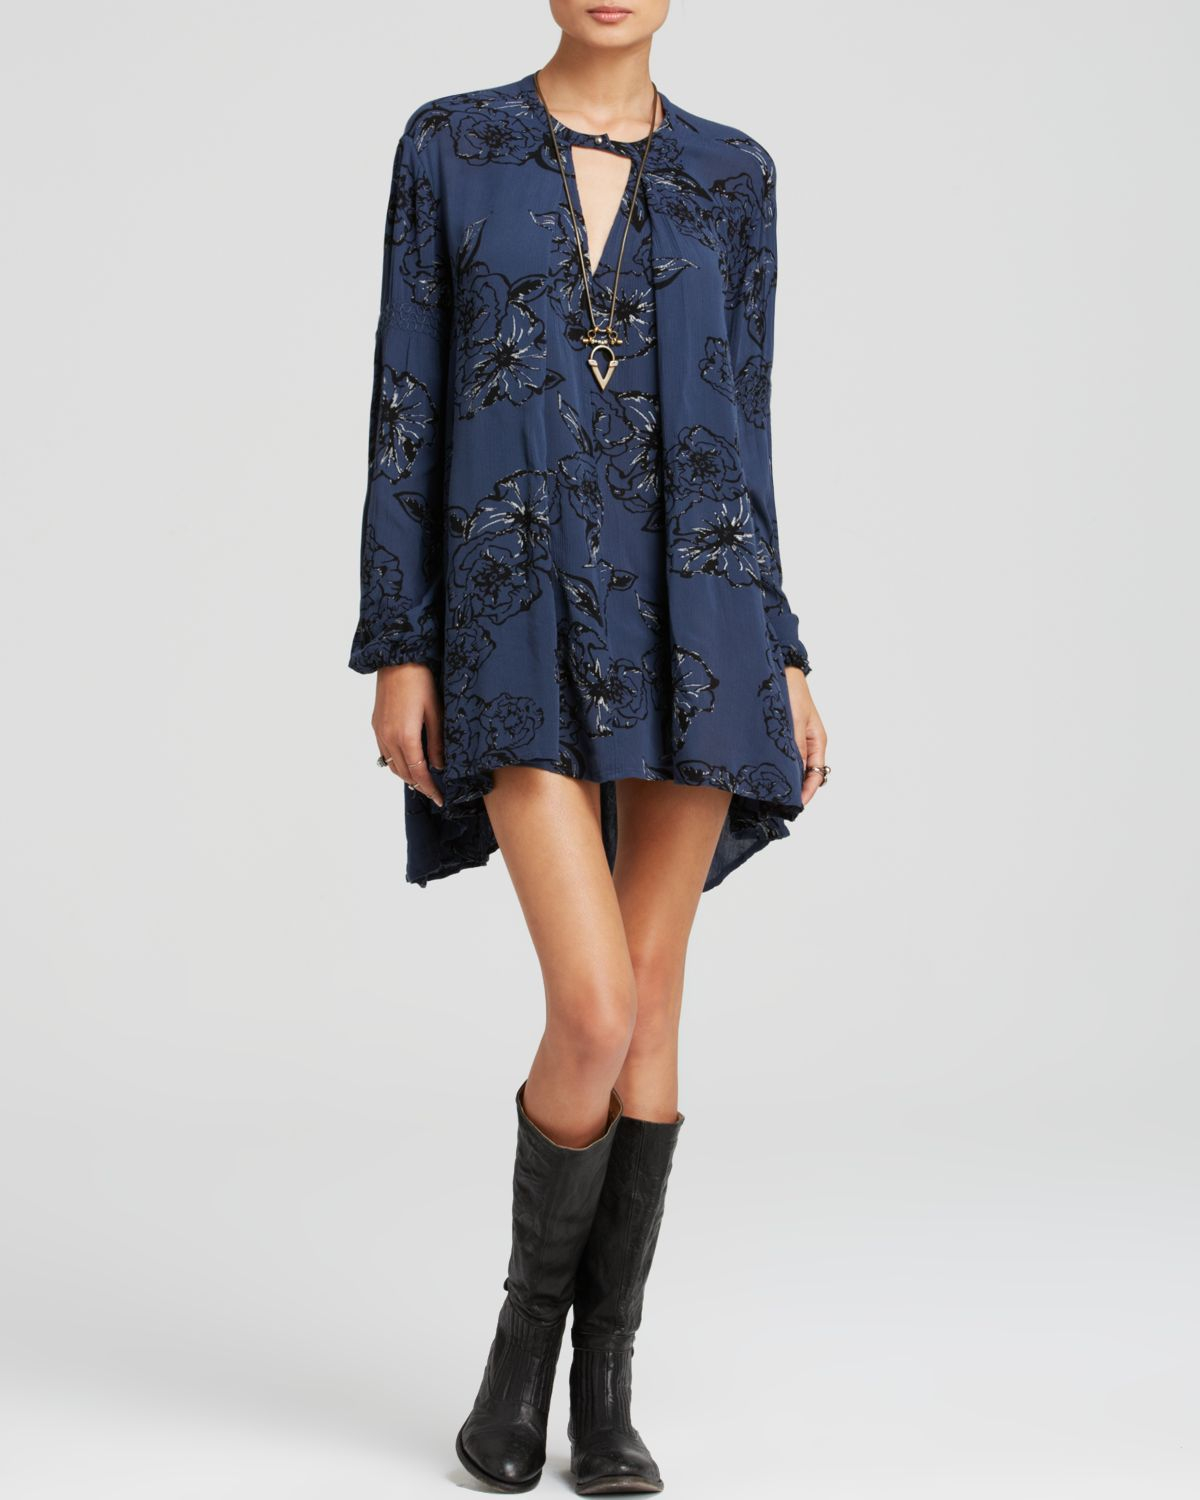 Lyst - Free People Tunic Dress - Printed Snap Out Of It Swing